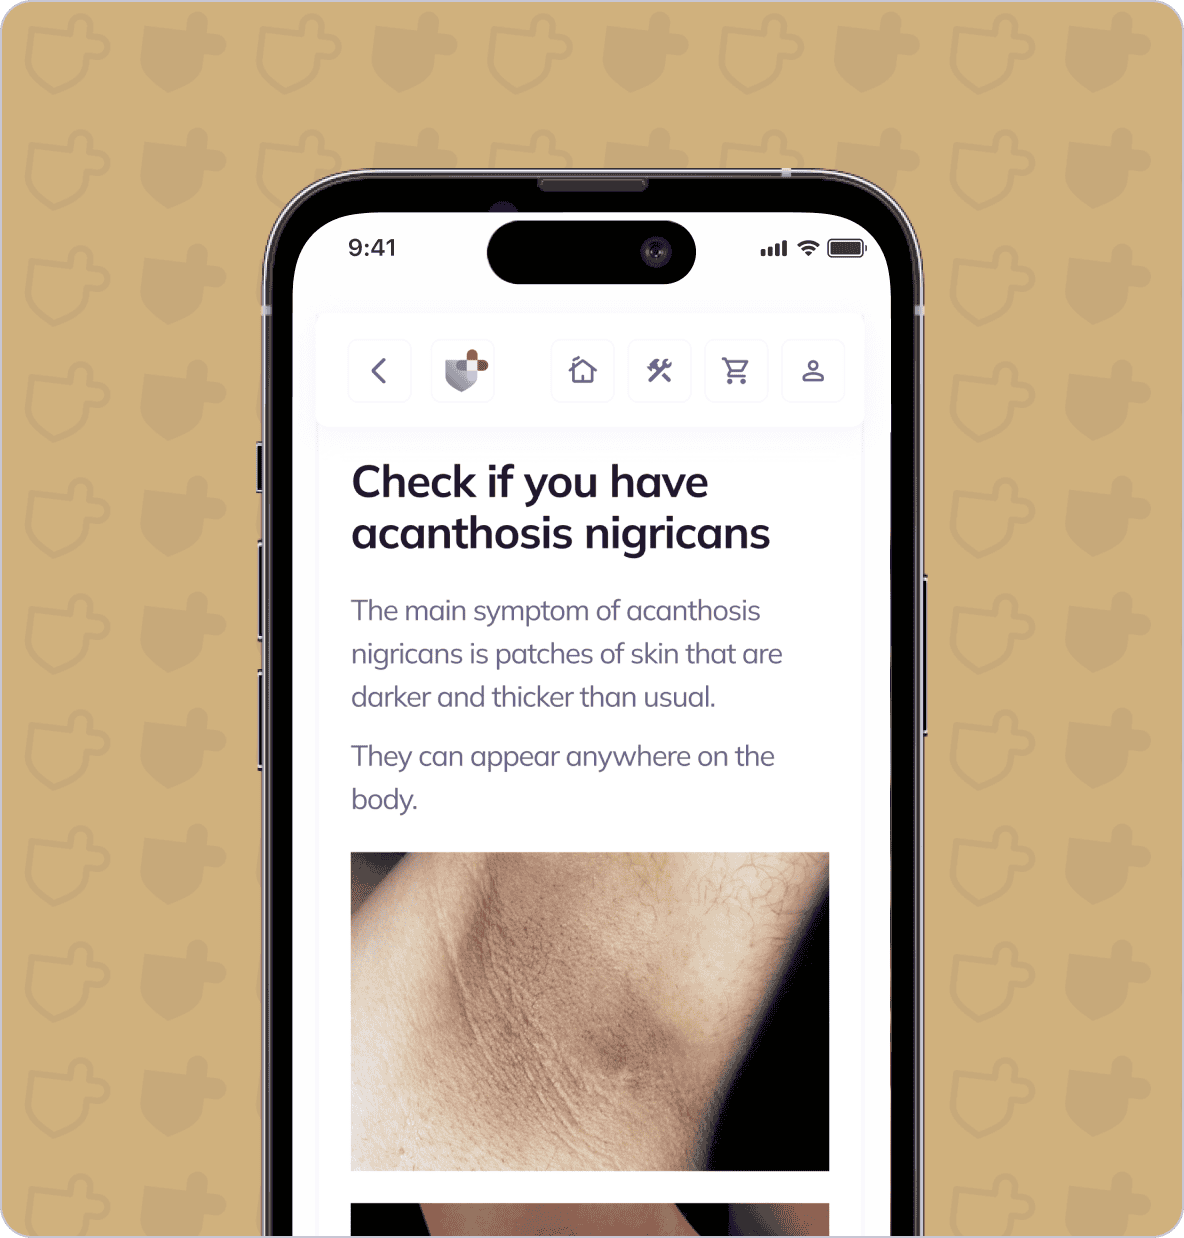 Smartphone screen displaying a webpage about acanthosis nigricans, highlighting its main symptom: dark, thick patches of skin, with an image of an affected skin area.